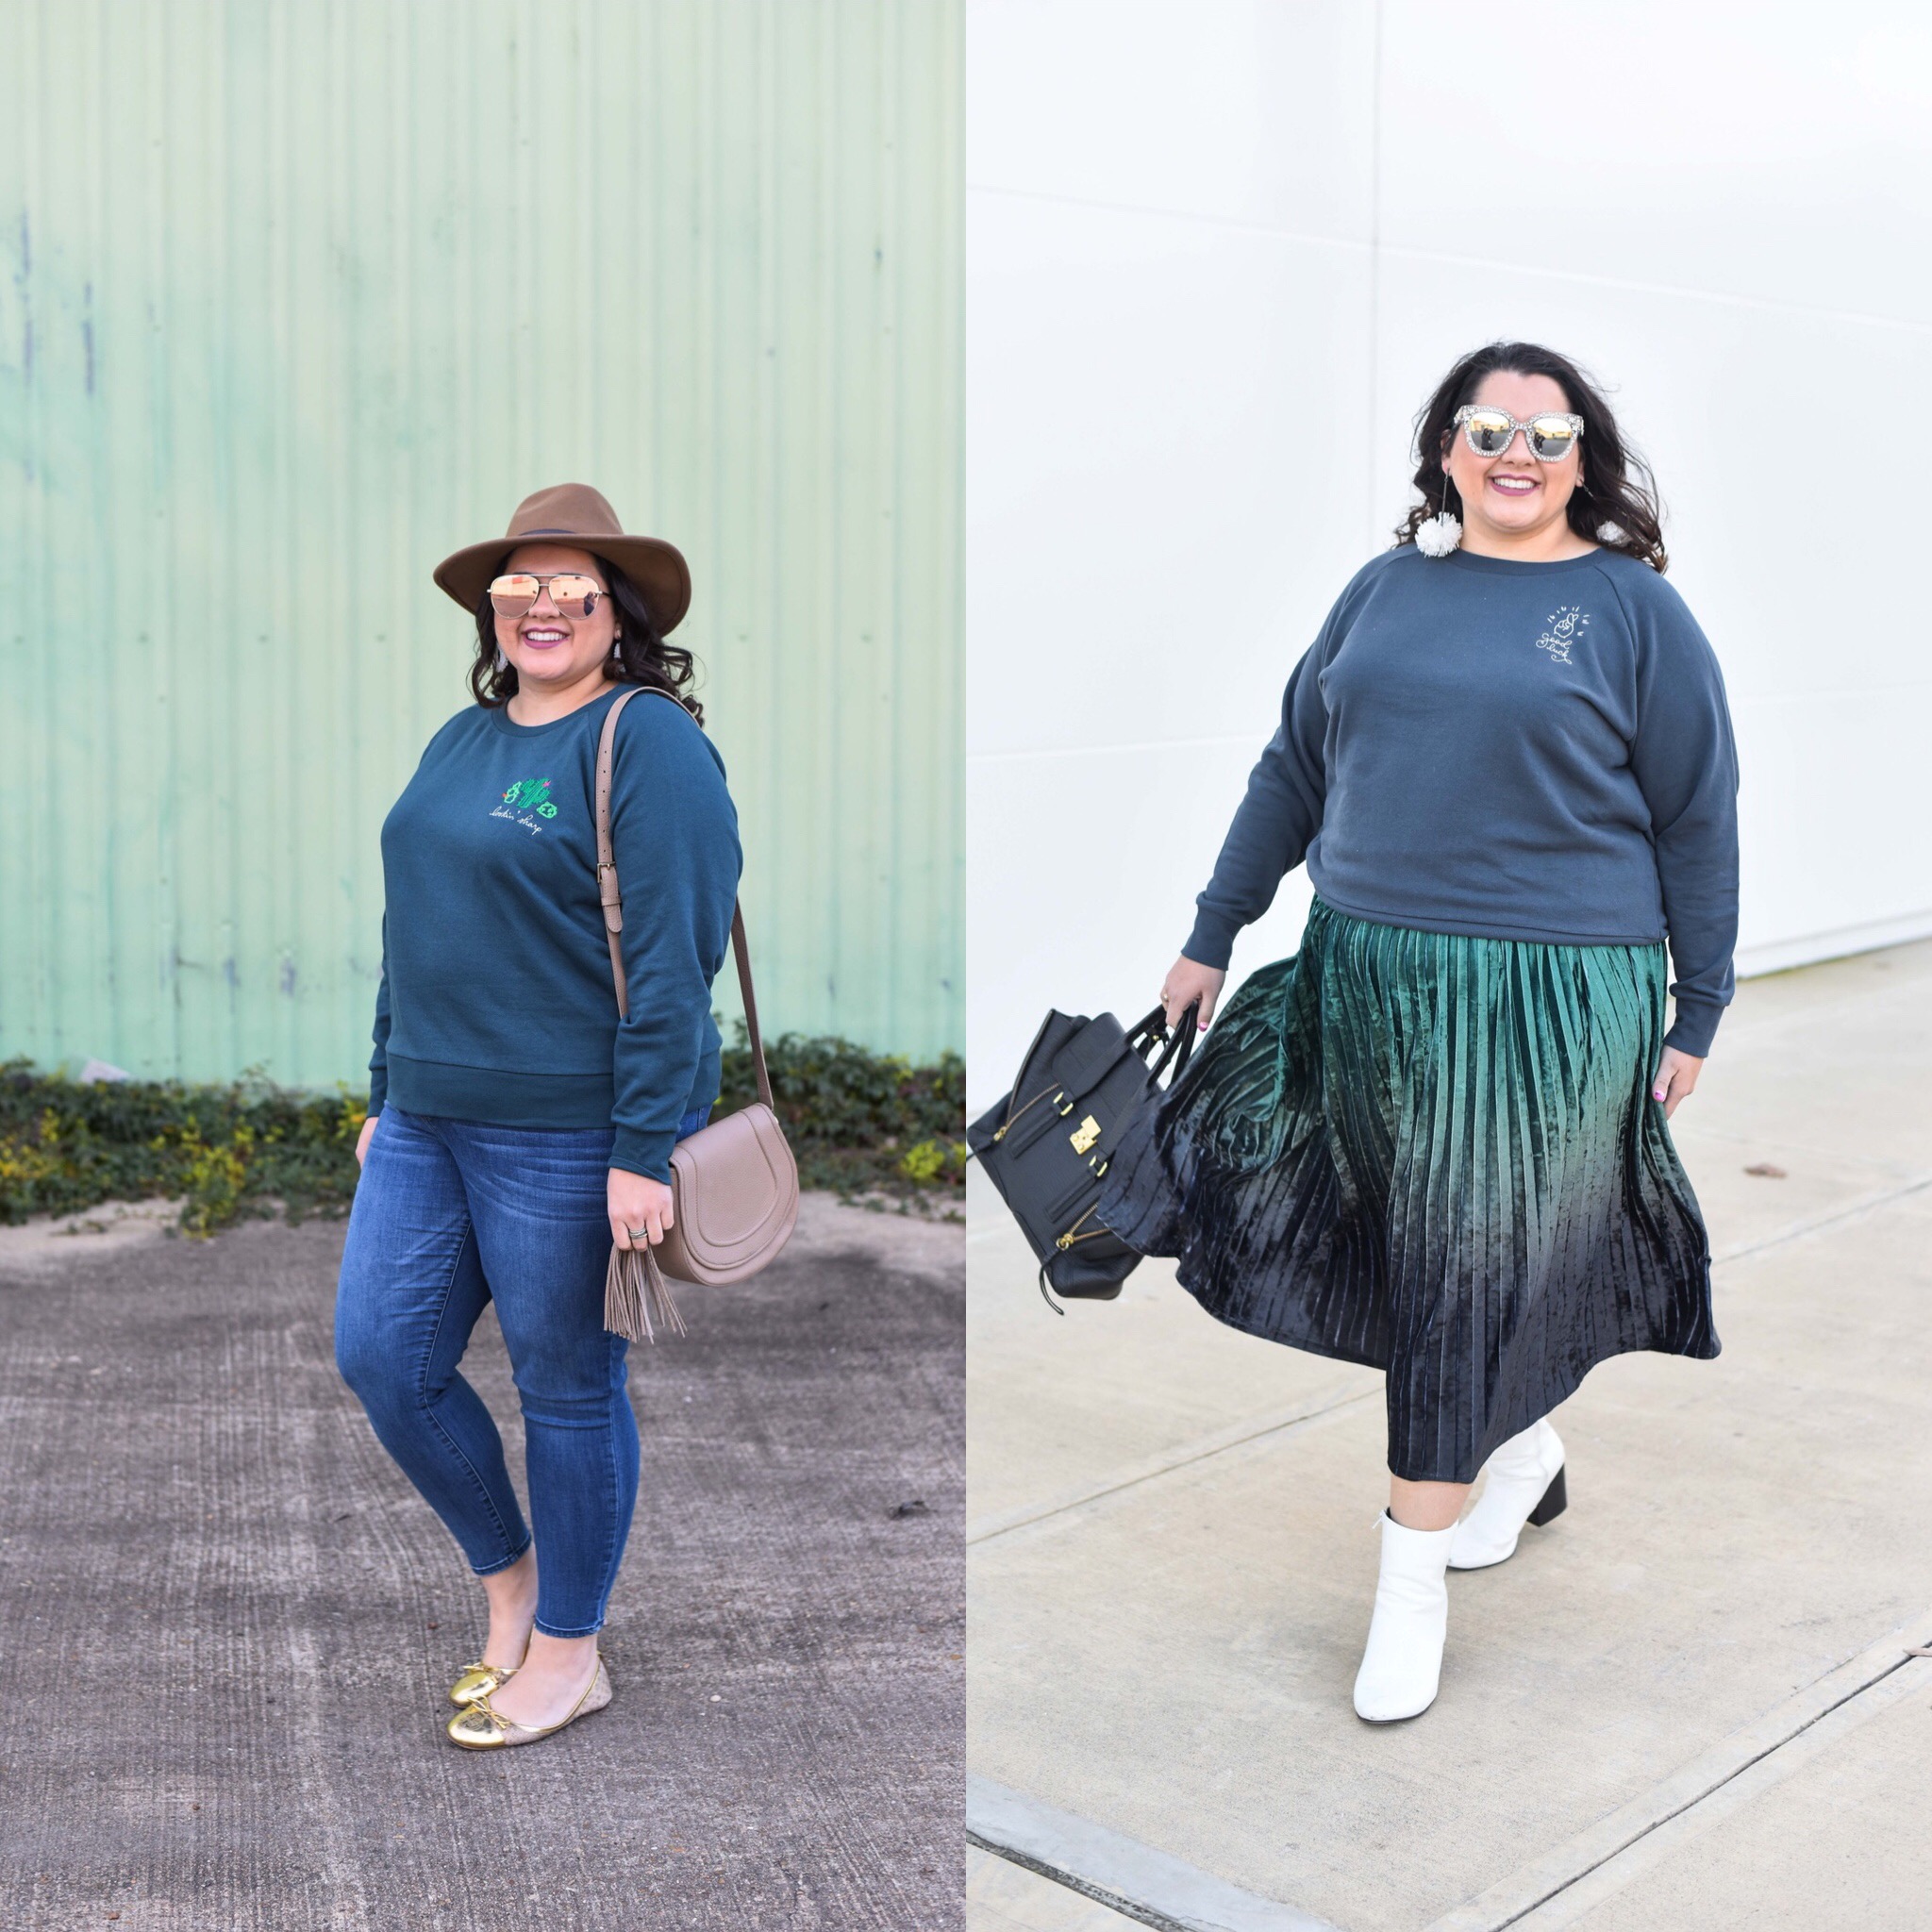 Talking about the biggest lesson I learned from Marie Kondo and how I'm trying to be more creative in styling items for more than one occasion - starting with the Ori embroidered sweatshirt. #plussizestyle 